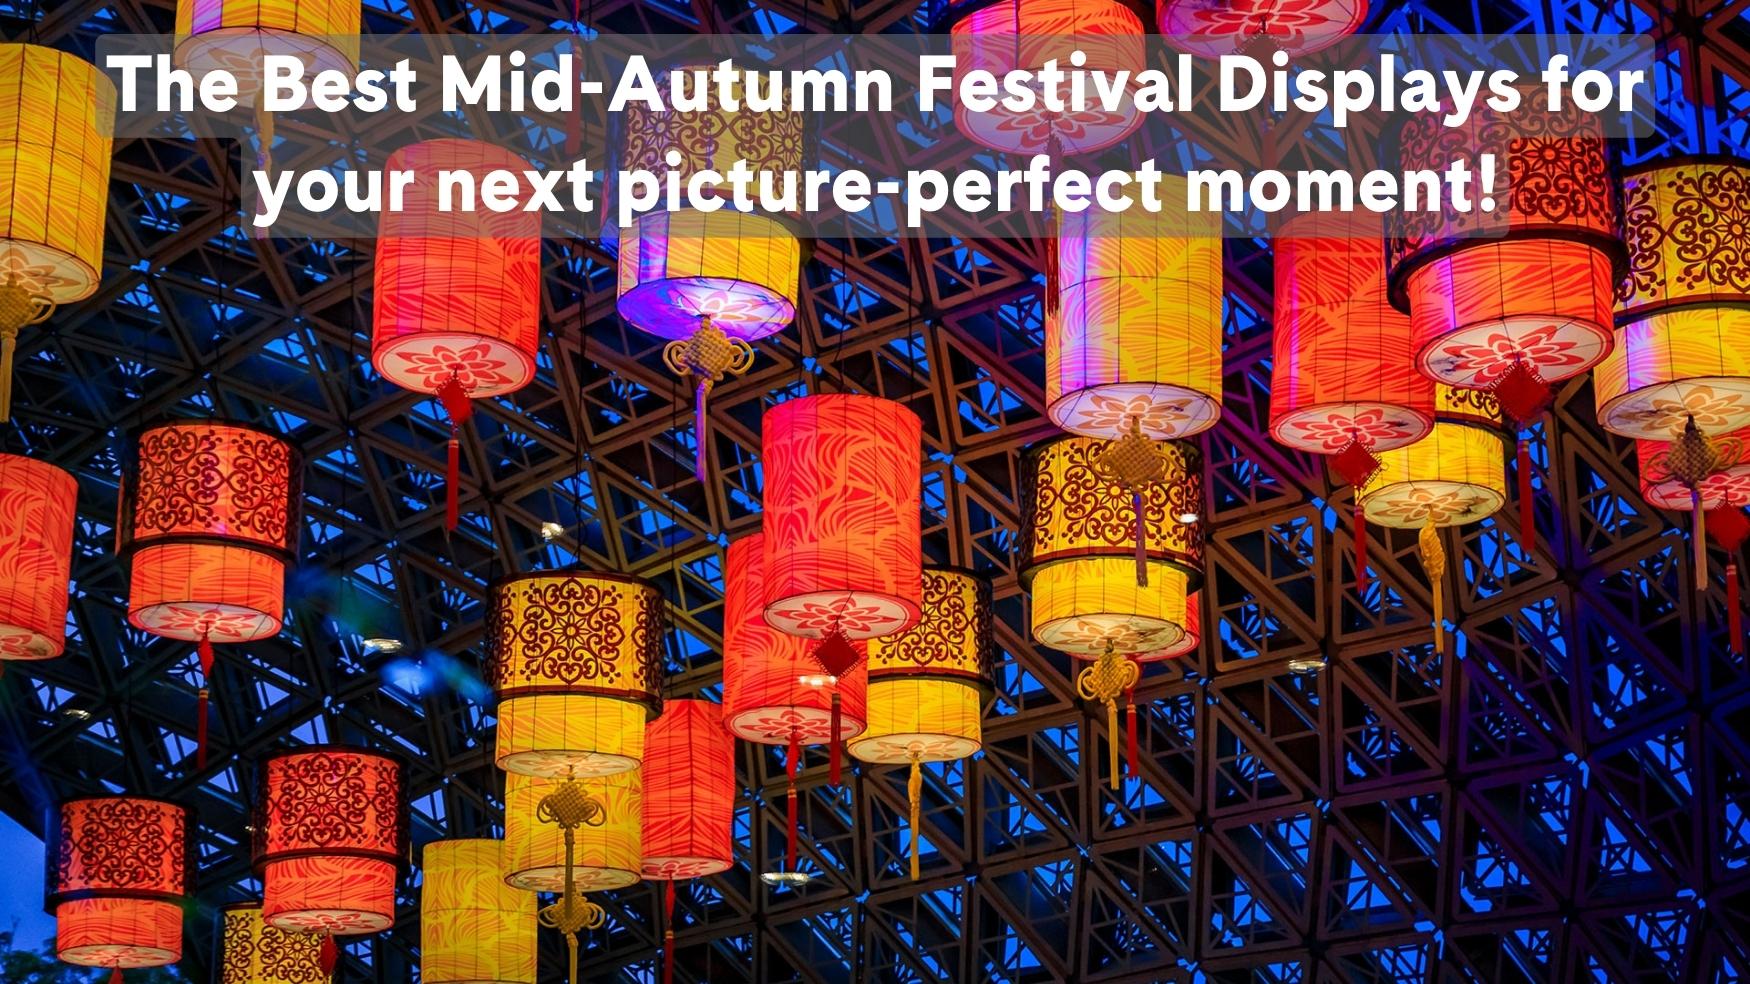 The Best Mid-Autumn Festival Displays for Your Next Picture-perfect Moment!